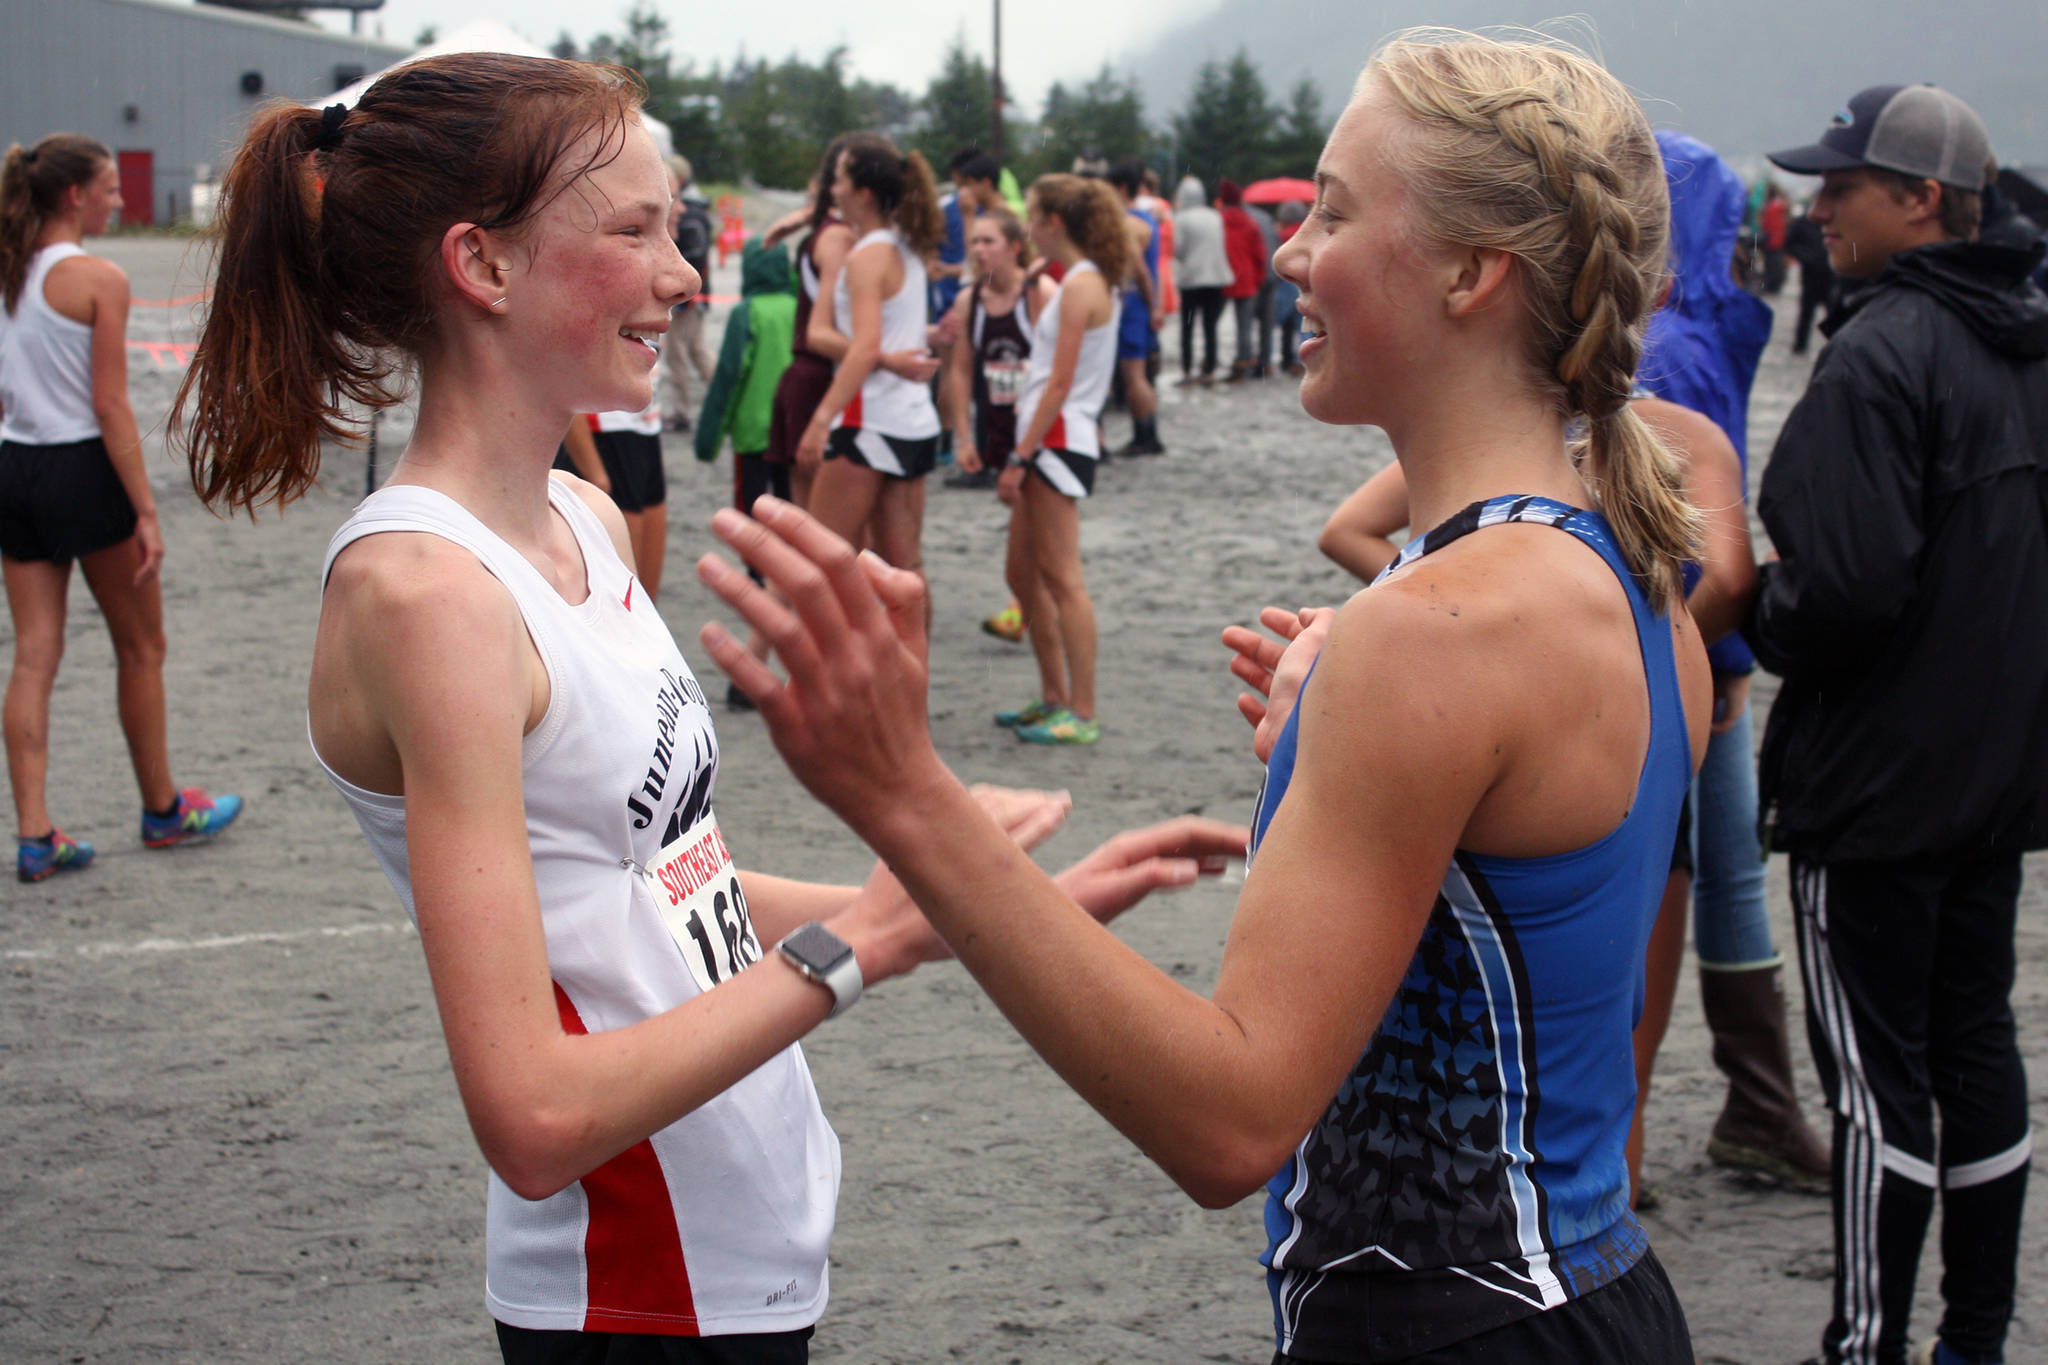 Photos: Season-opening race for Juneau’s cross country teams